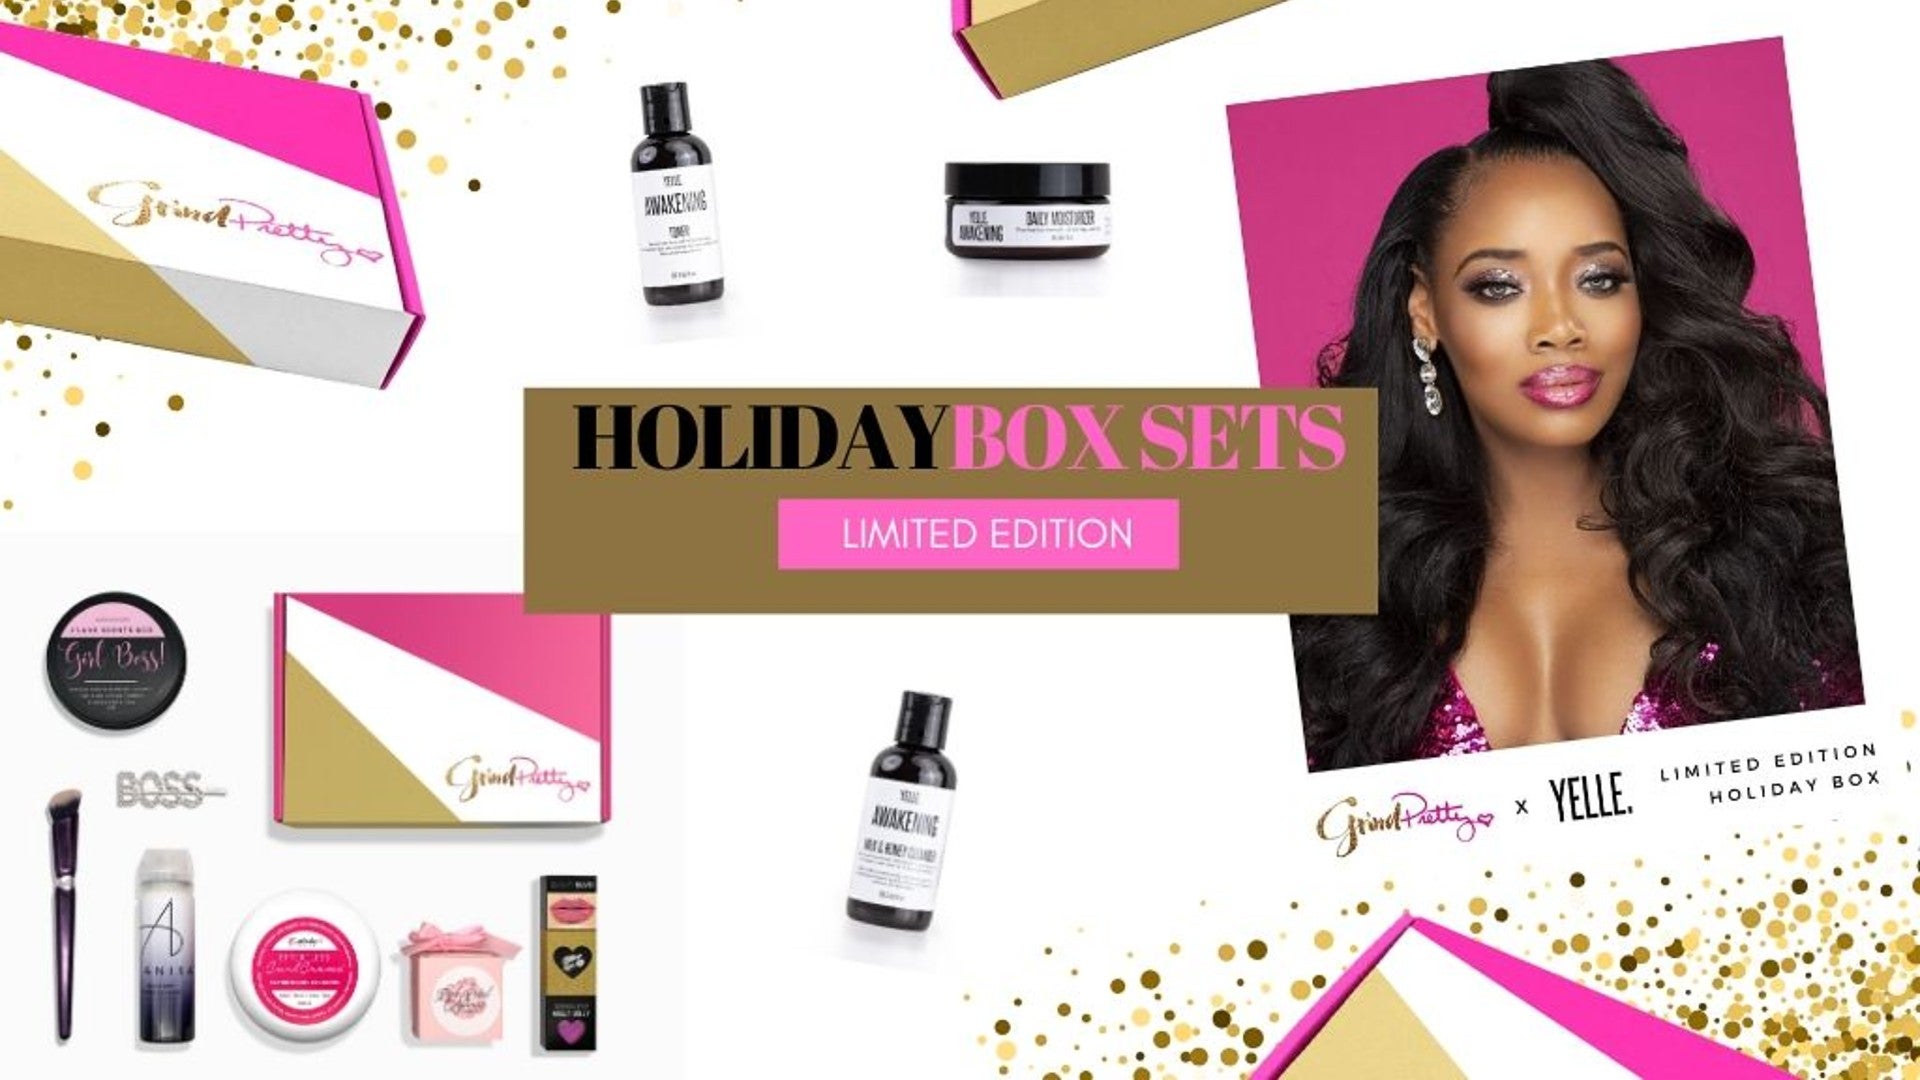 Yandy Smith Teams Up With Grind Pretty For Holiday Box